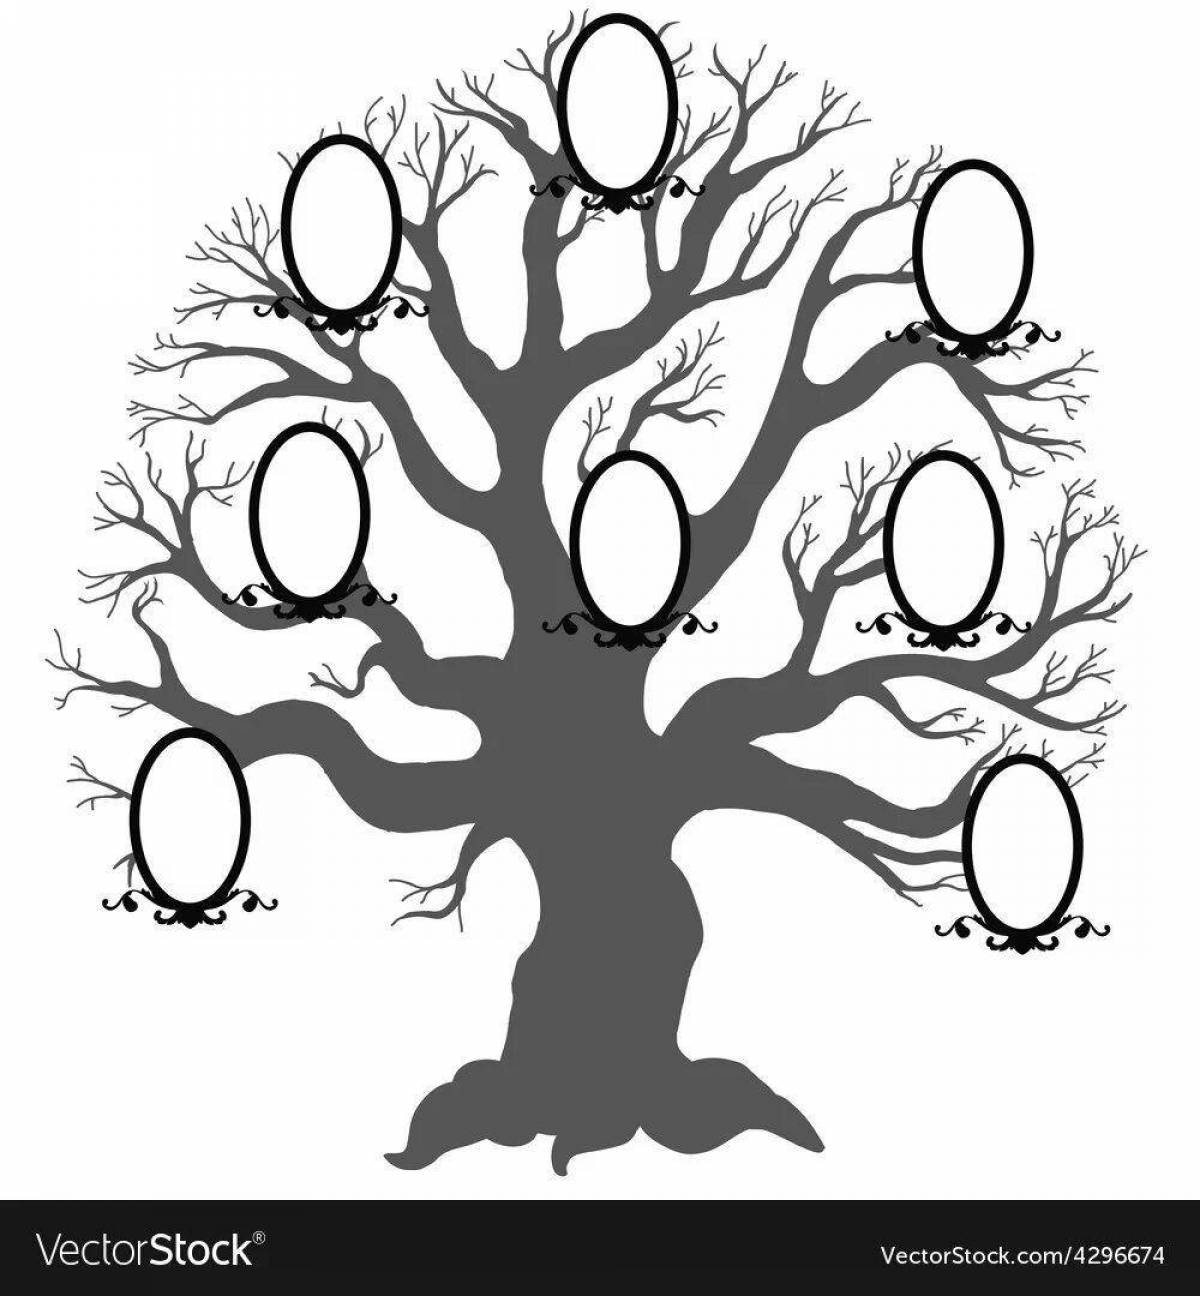 Coloring book shining family tree